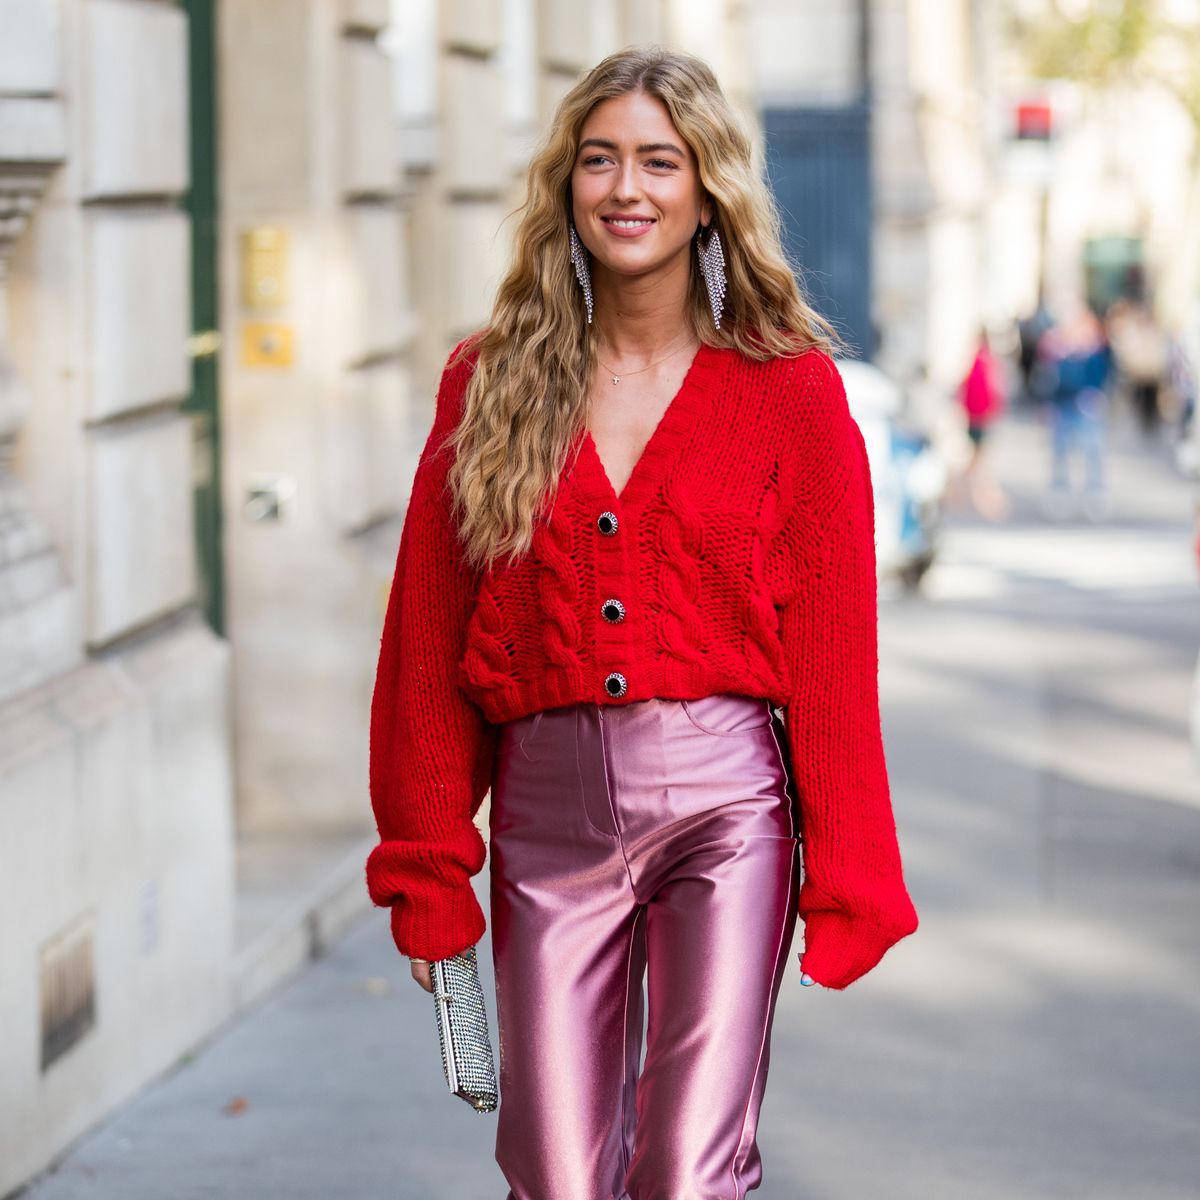 7 Valentine's Day Outfit Ideas for 2023